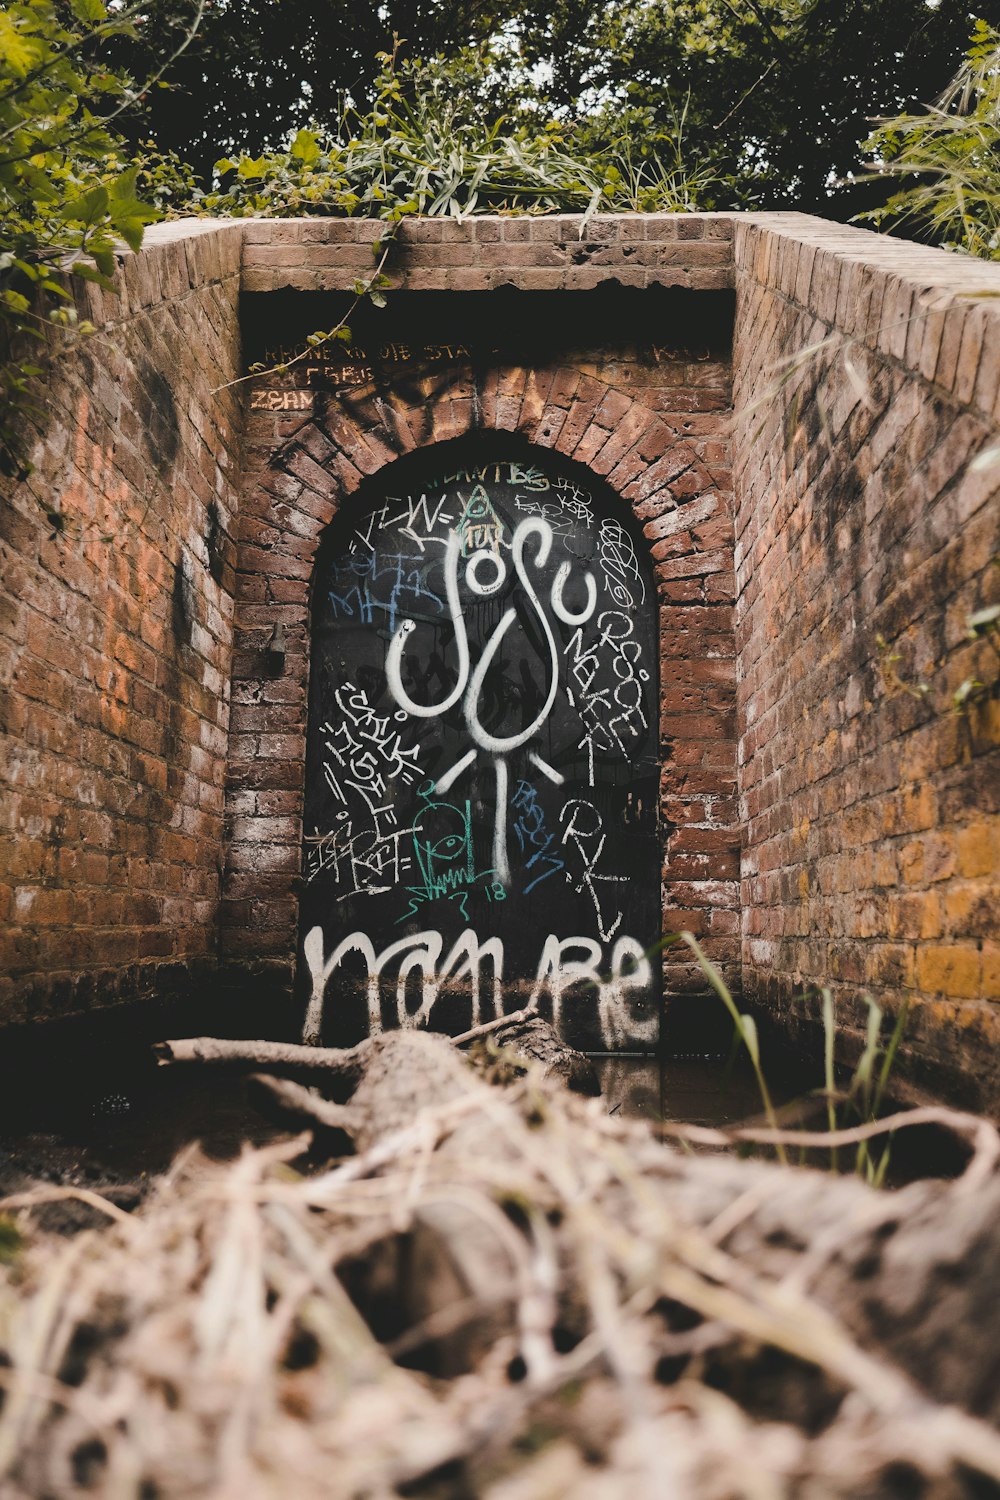 a brick wall with graffiti on it and a door